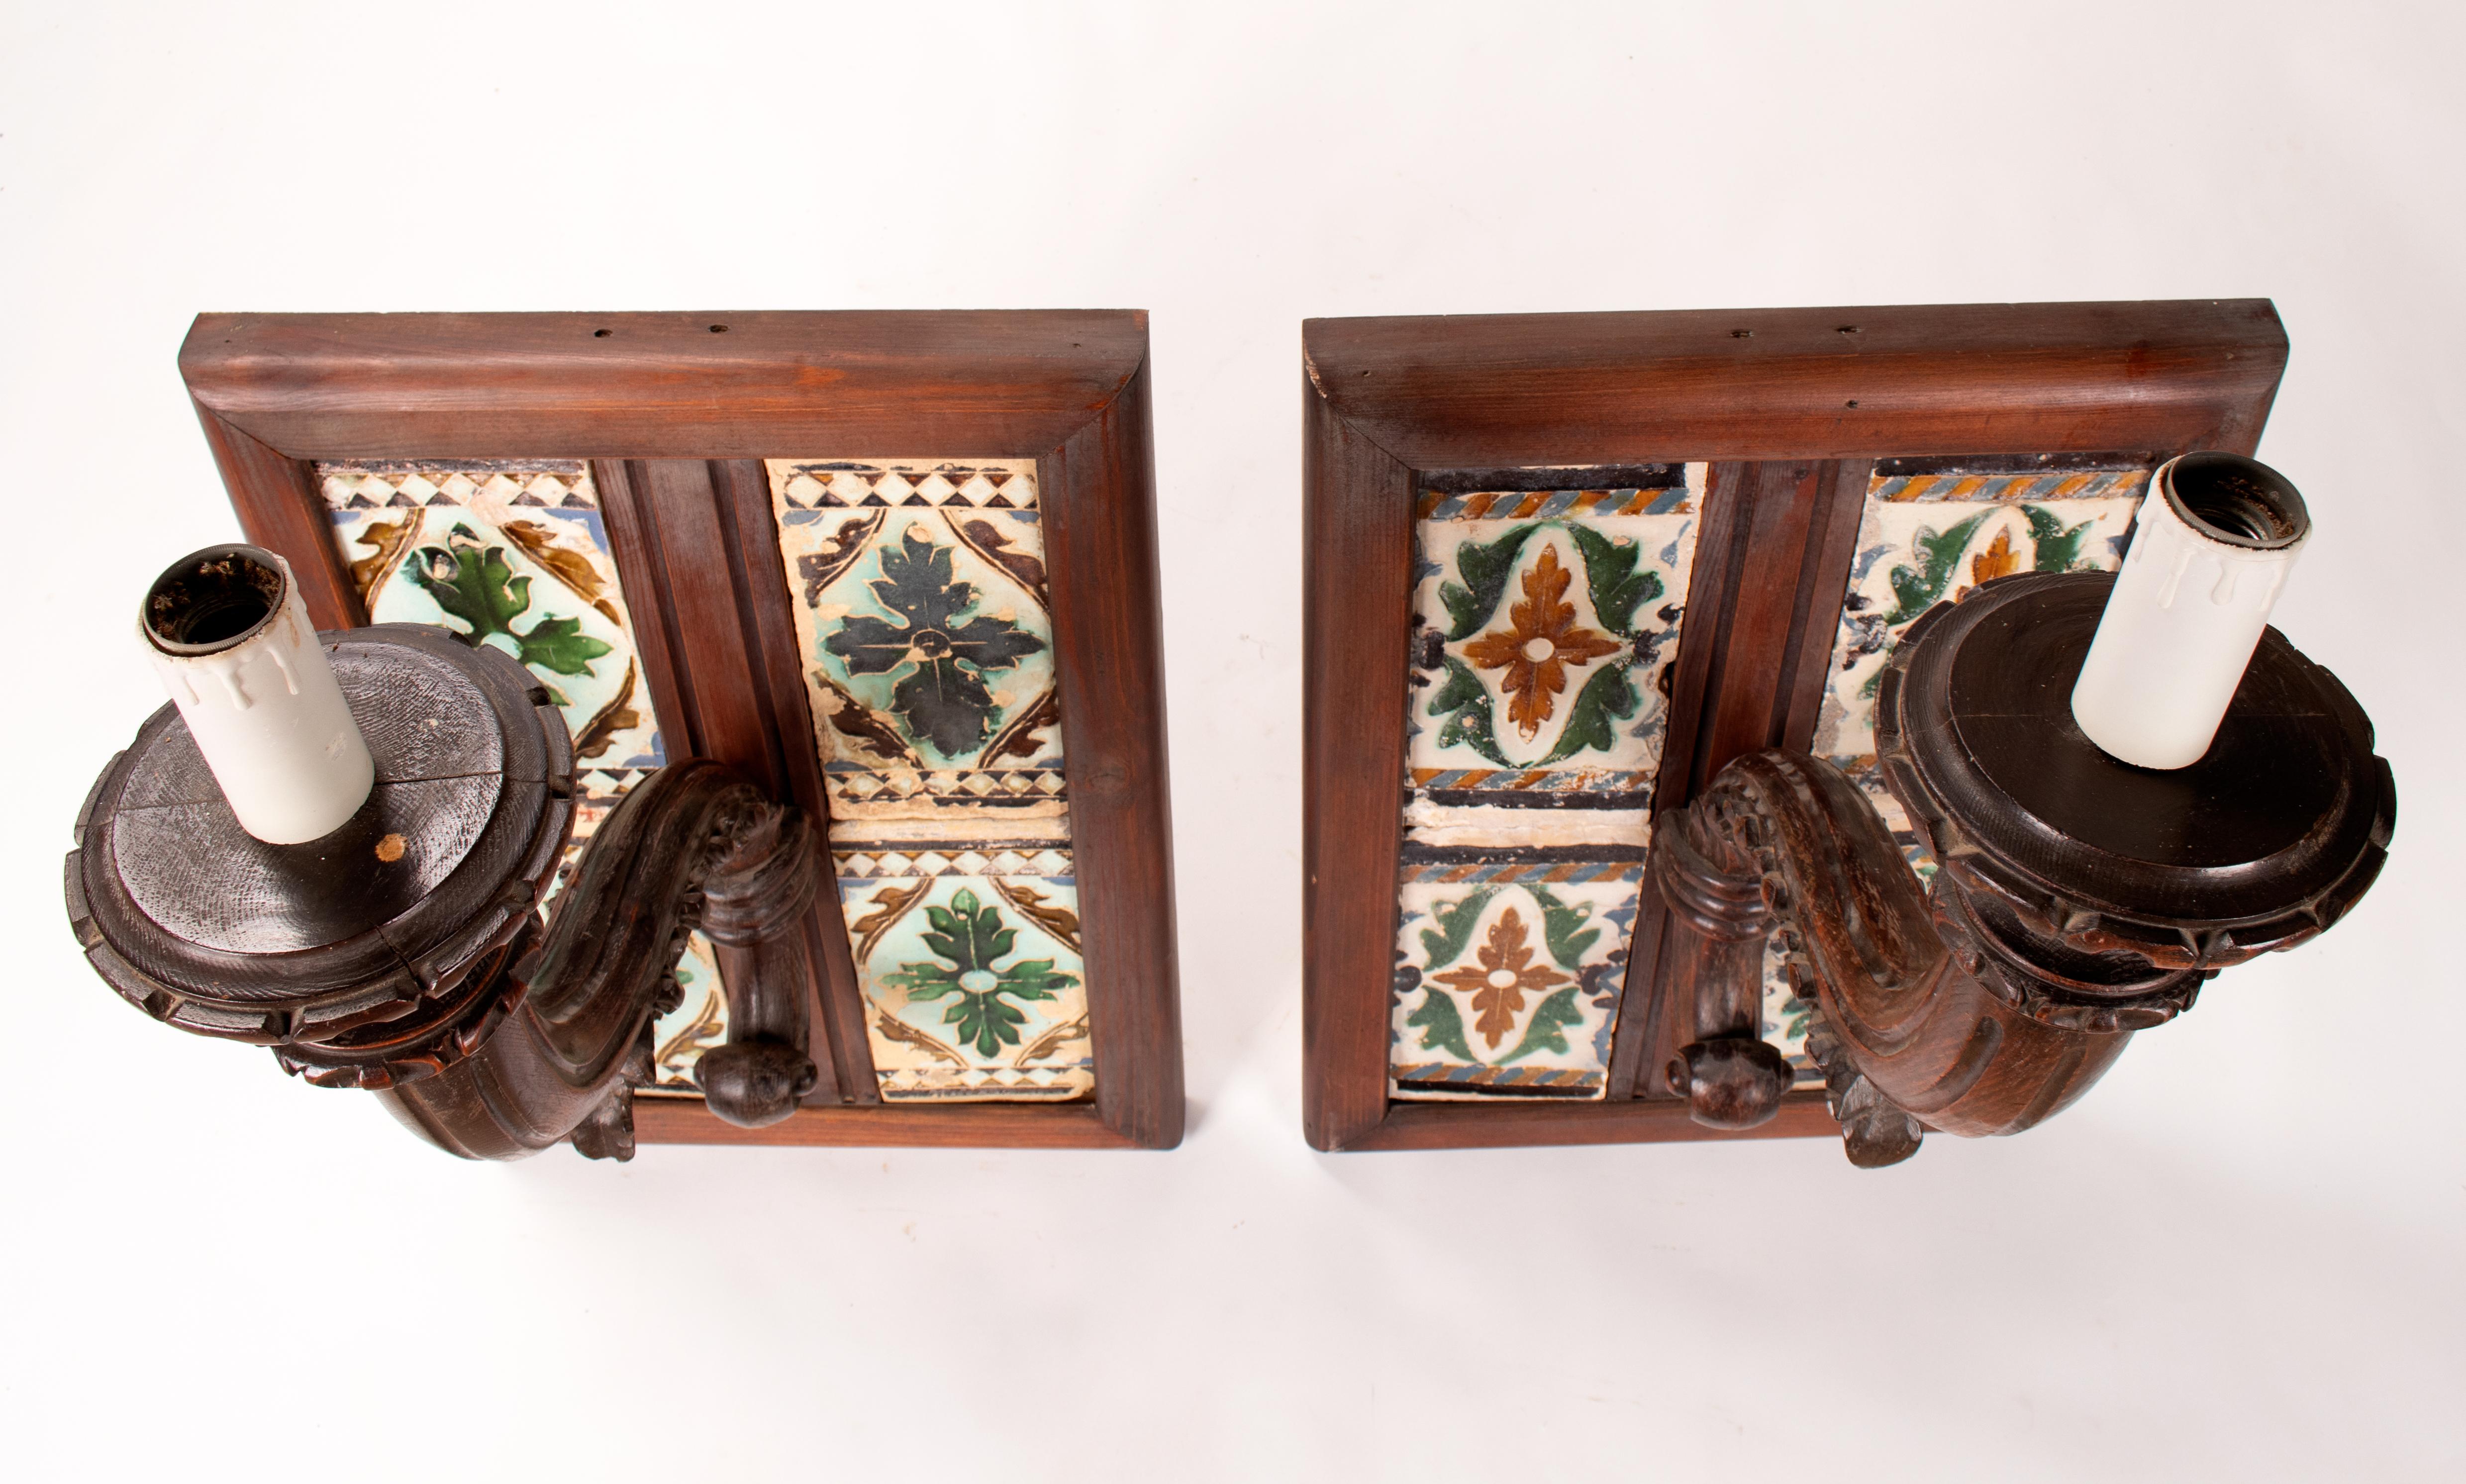 19th century pair of Spanish wooden wall lamps with 16th century cuerda seca glazed ceramic tiles. 

When different coloured glazes are applied to a ceramic surface, the glazes have a tendency to run together during the firing process. In the